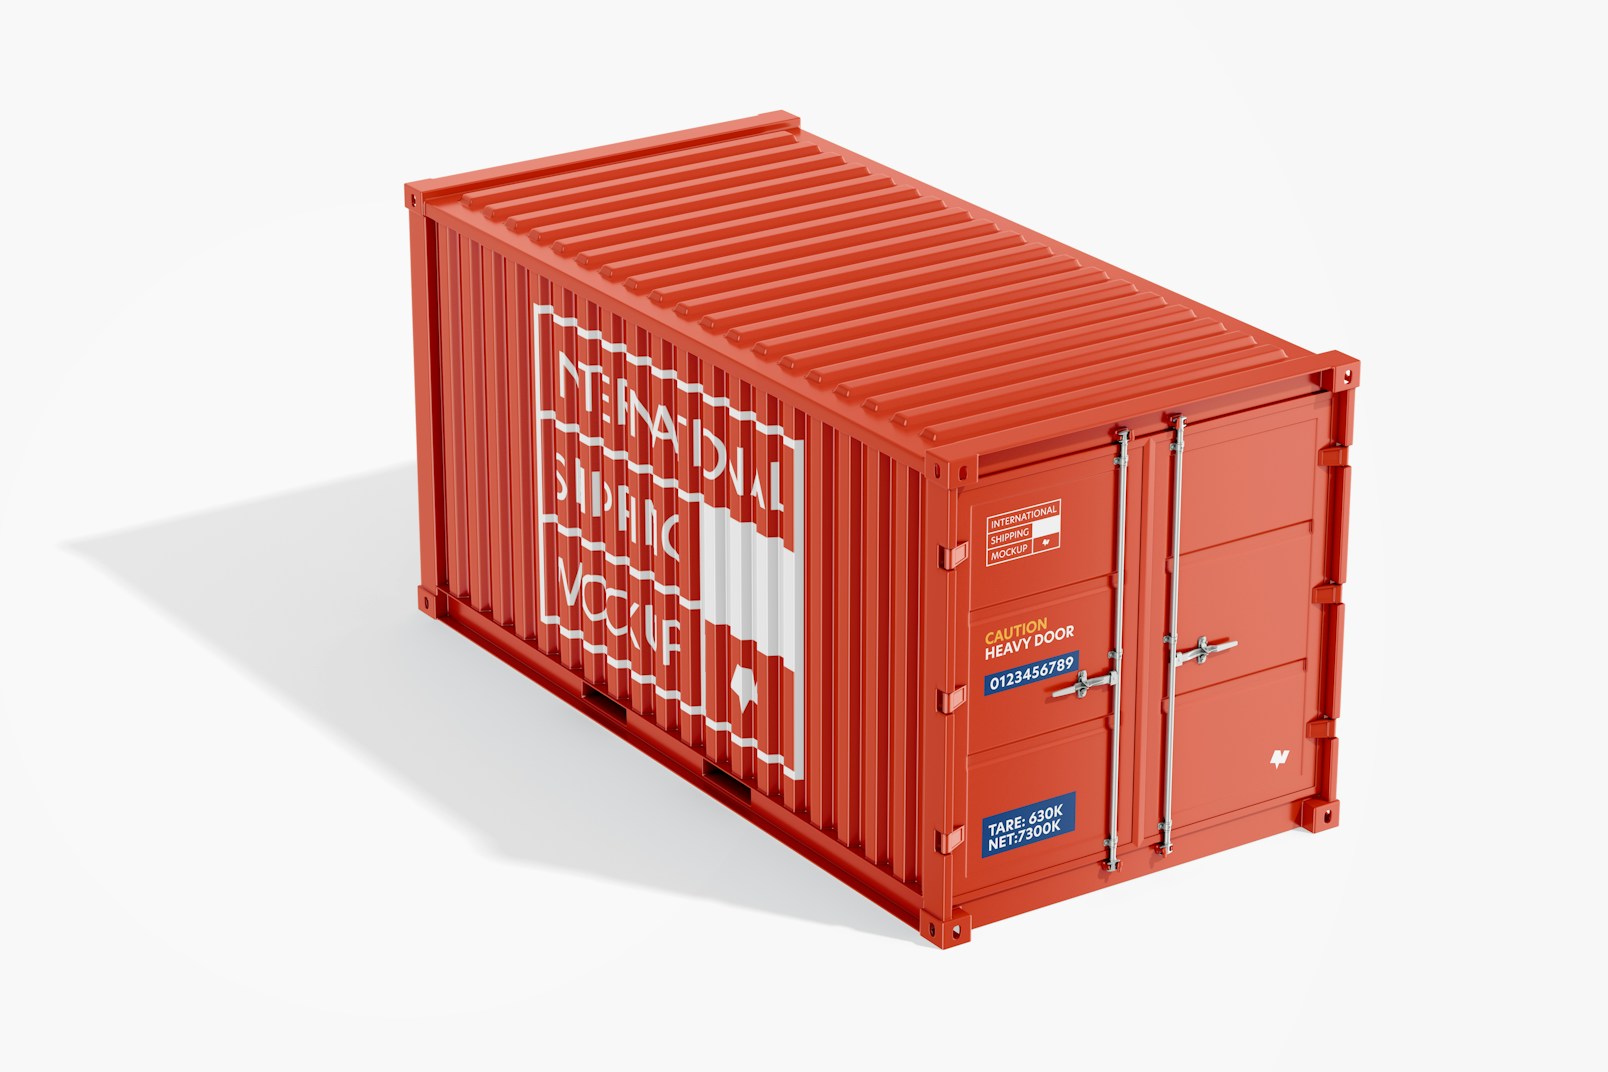 Long Shipping Container Mockup, Perspective